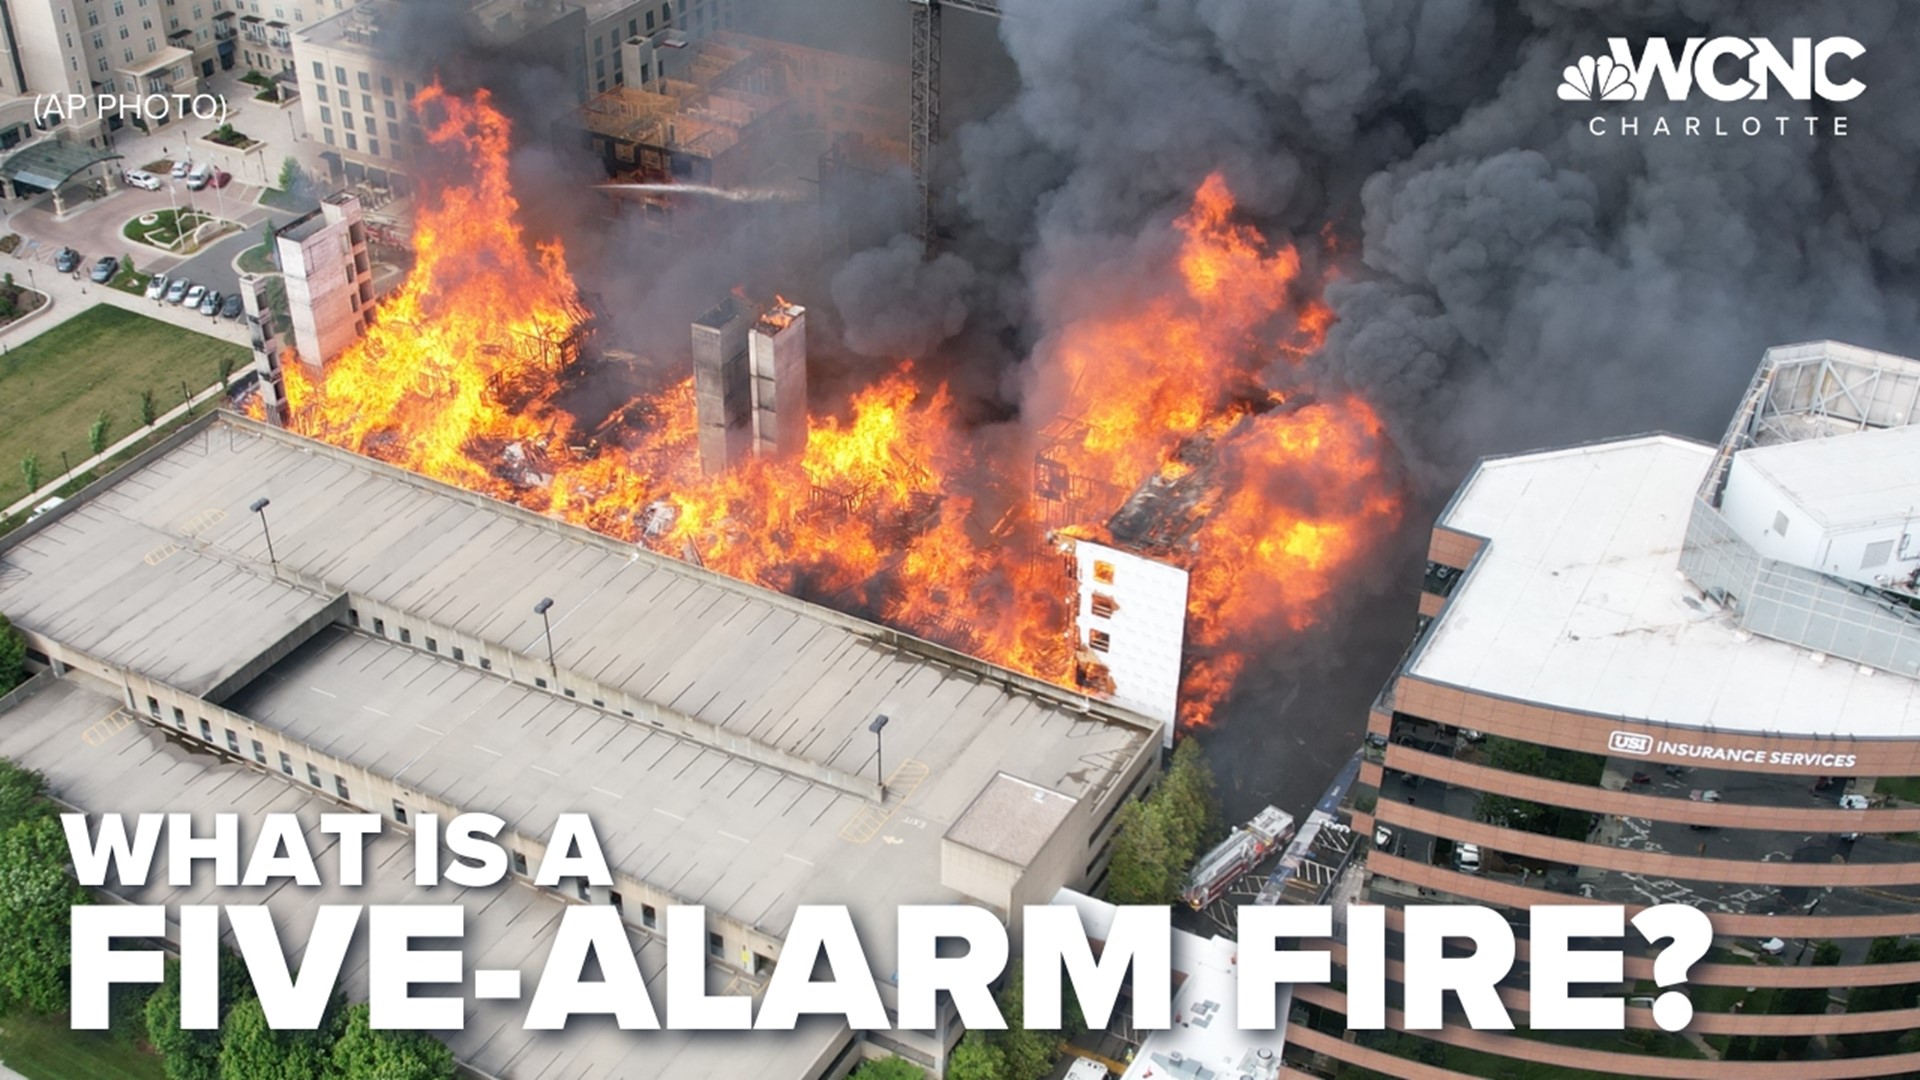 A lot of questions are still unanswered about the SouthPark fire. WCNC Charlotte's Meghan Bragg breaks down what a five-alarm fire is.